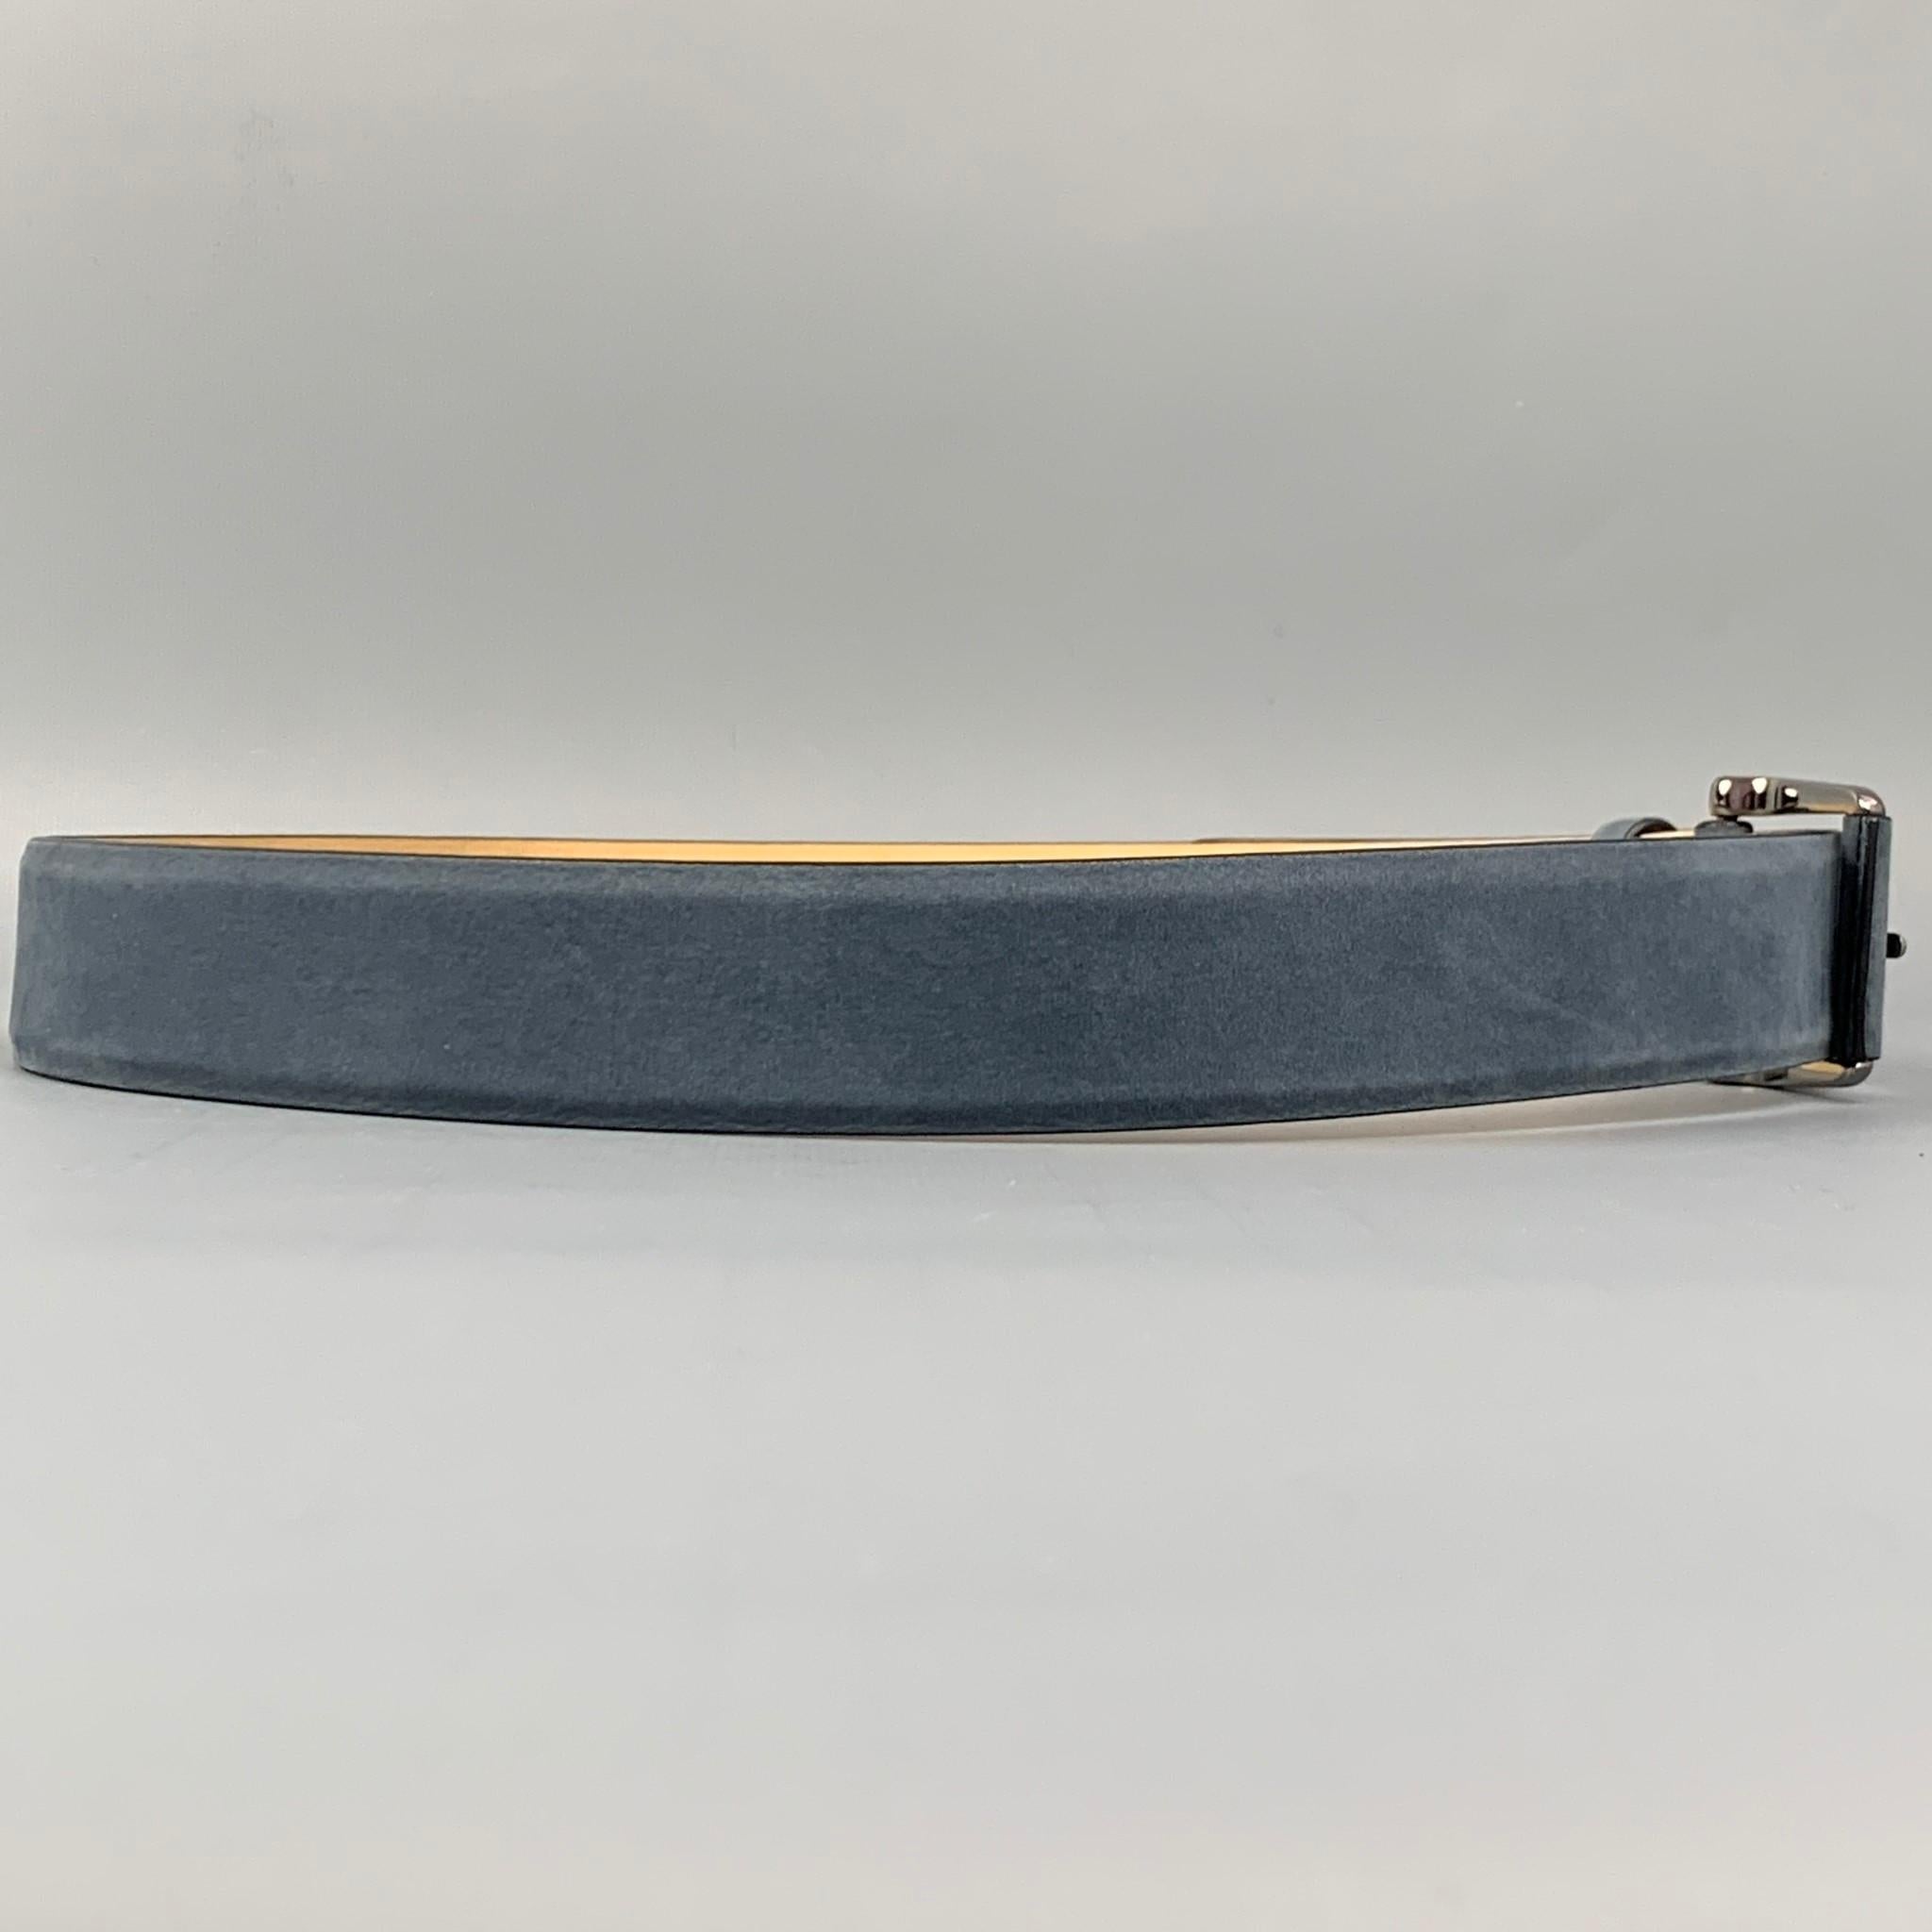 TOD'S belt comes in a blue suede with a silver tones buckle closure. Made in Italy. 

Very Good Pre-Owned Condition.
Marked: 90 EO 27
Original Retail Price: $425.00

Length: 41.5 in.
Width: 1.5 in.
Fits: 34 in. - 38 in.
Buckle: 1.5 in. 